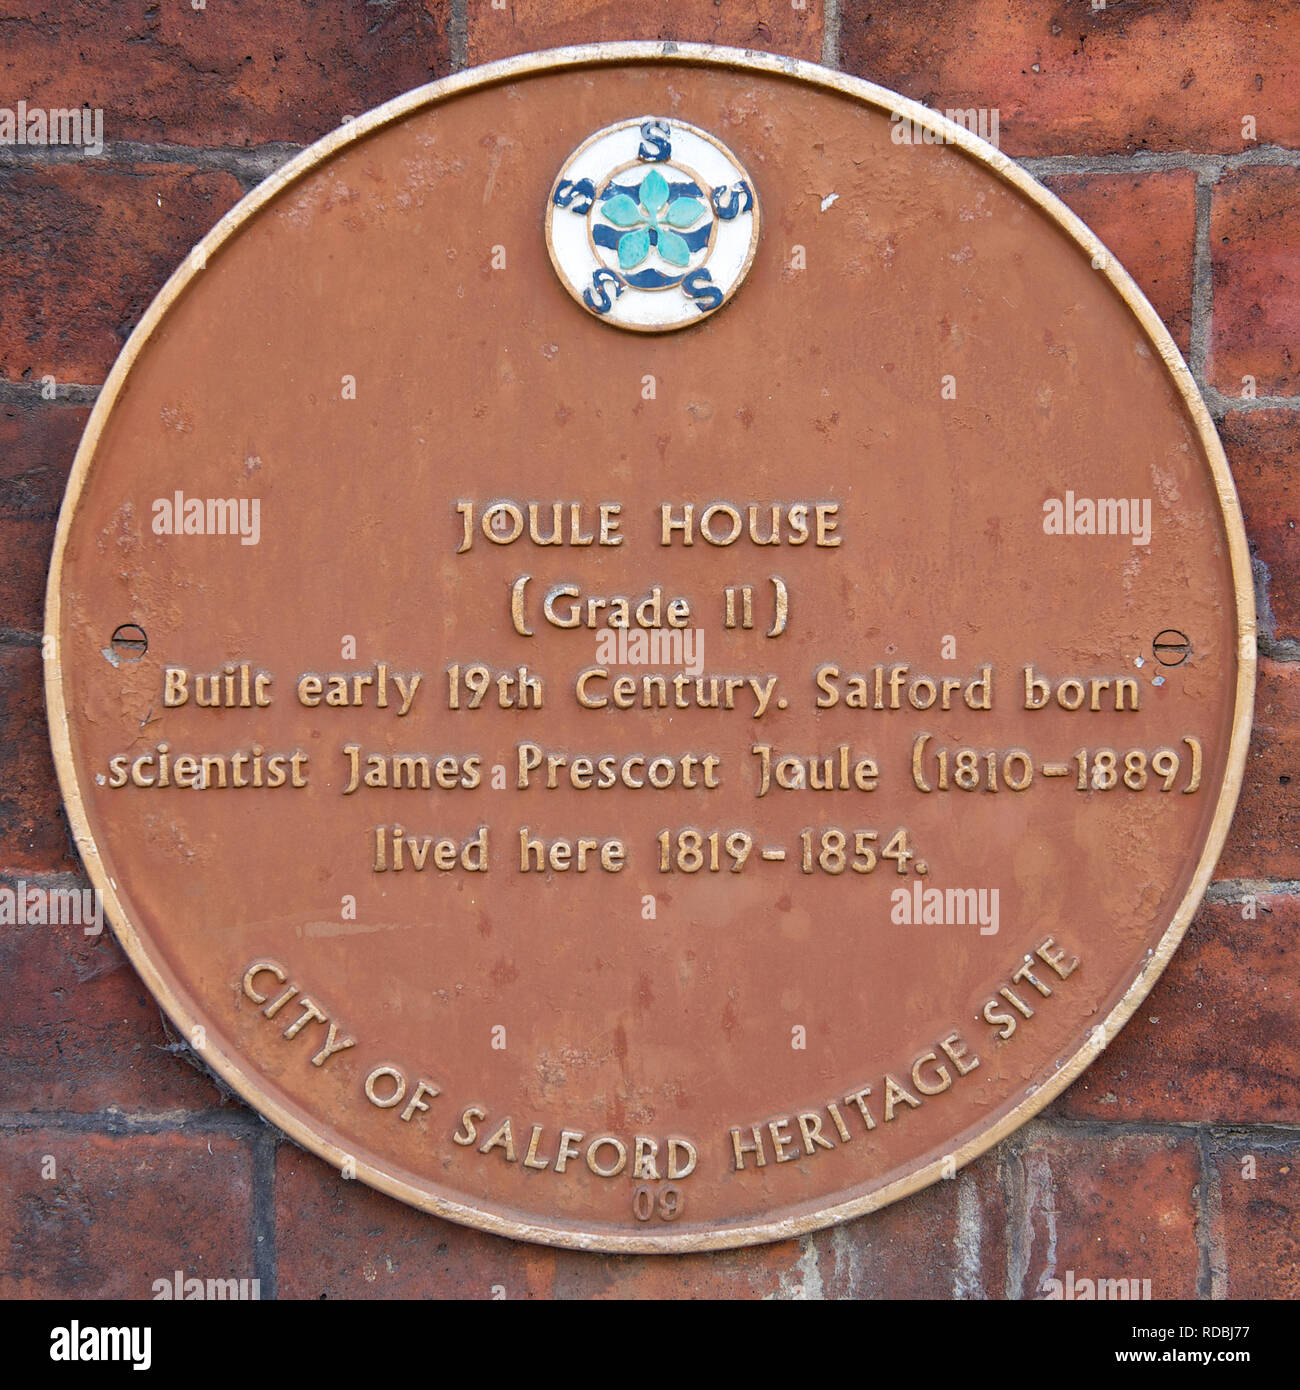 Joule House, Salford, Manchester Stock Photo